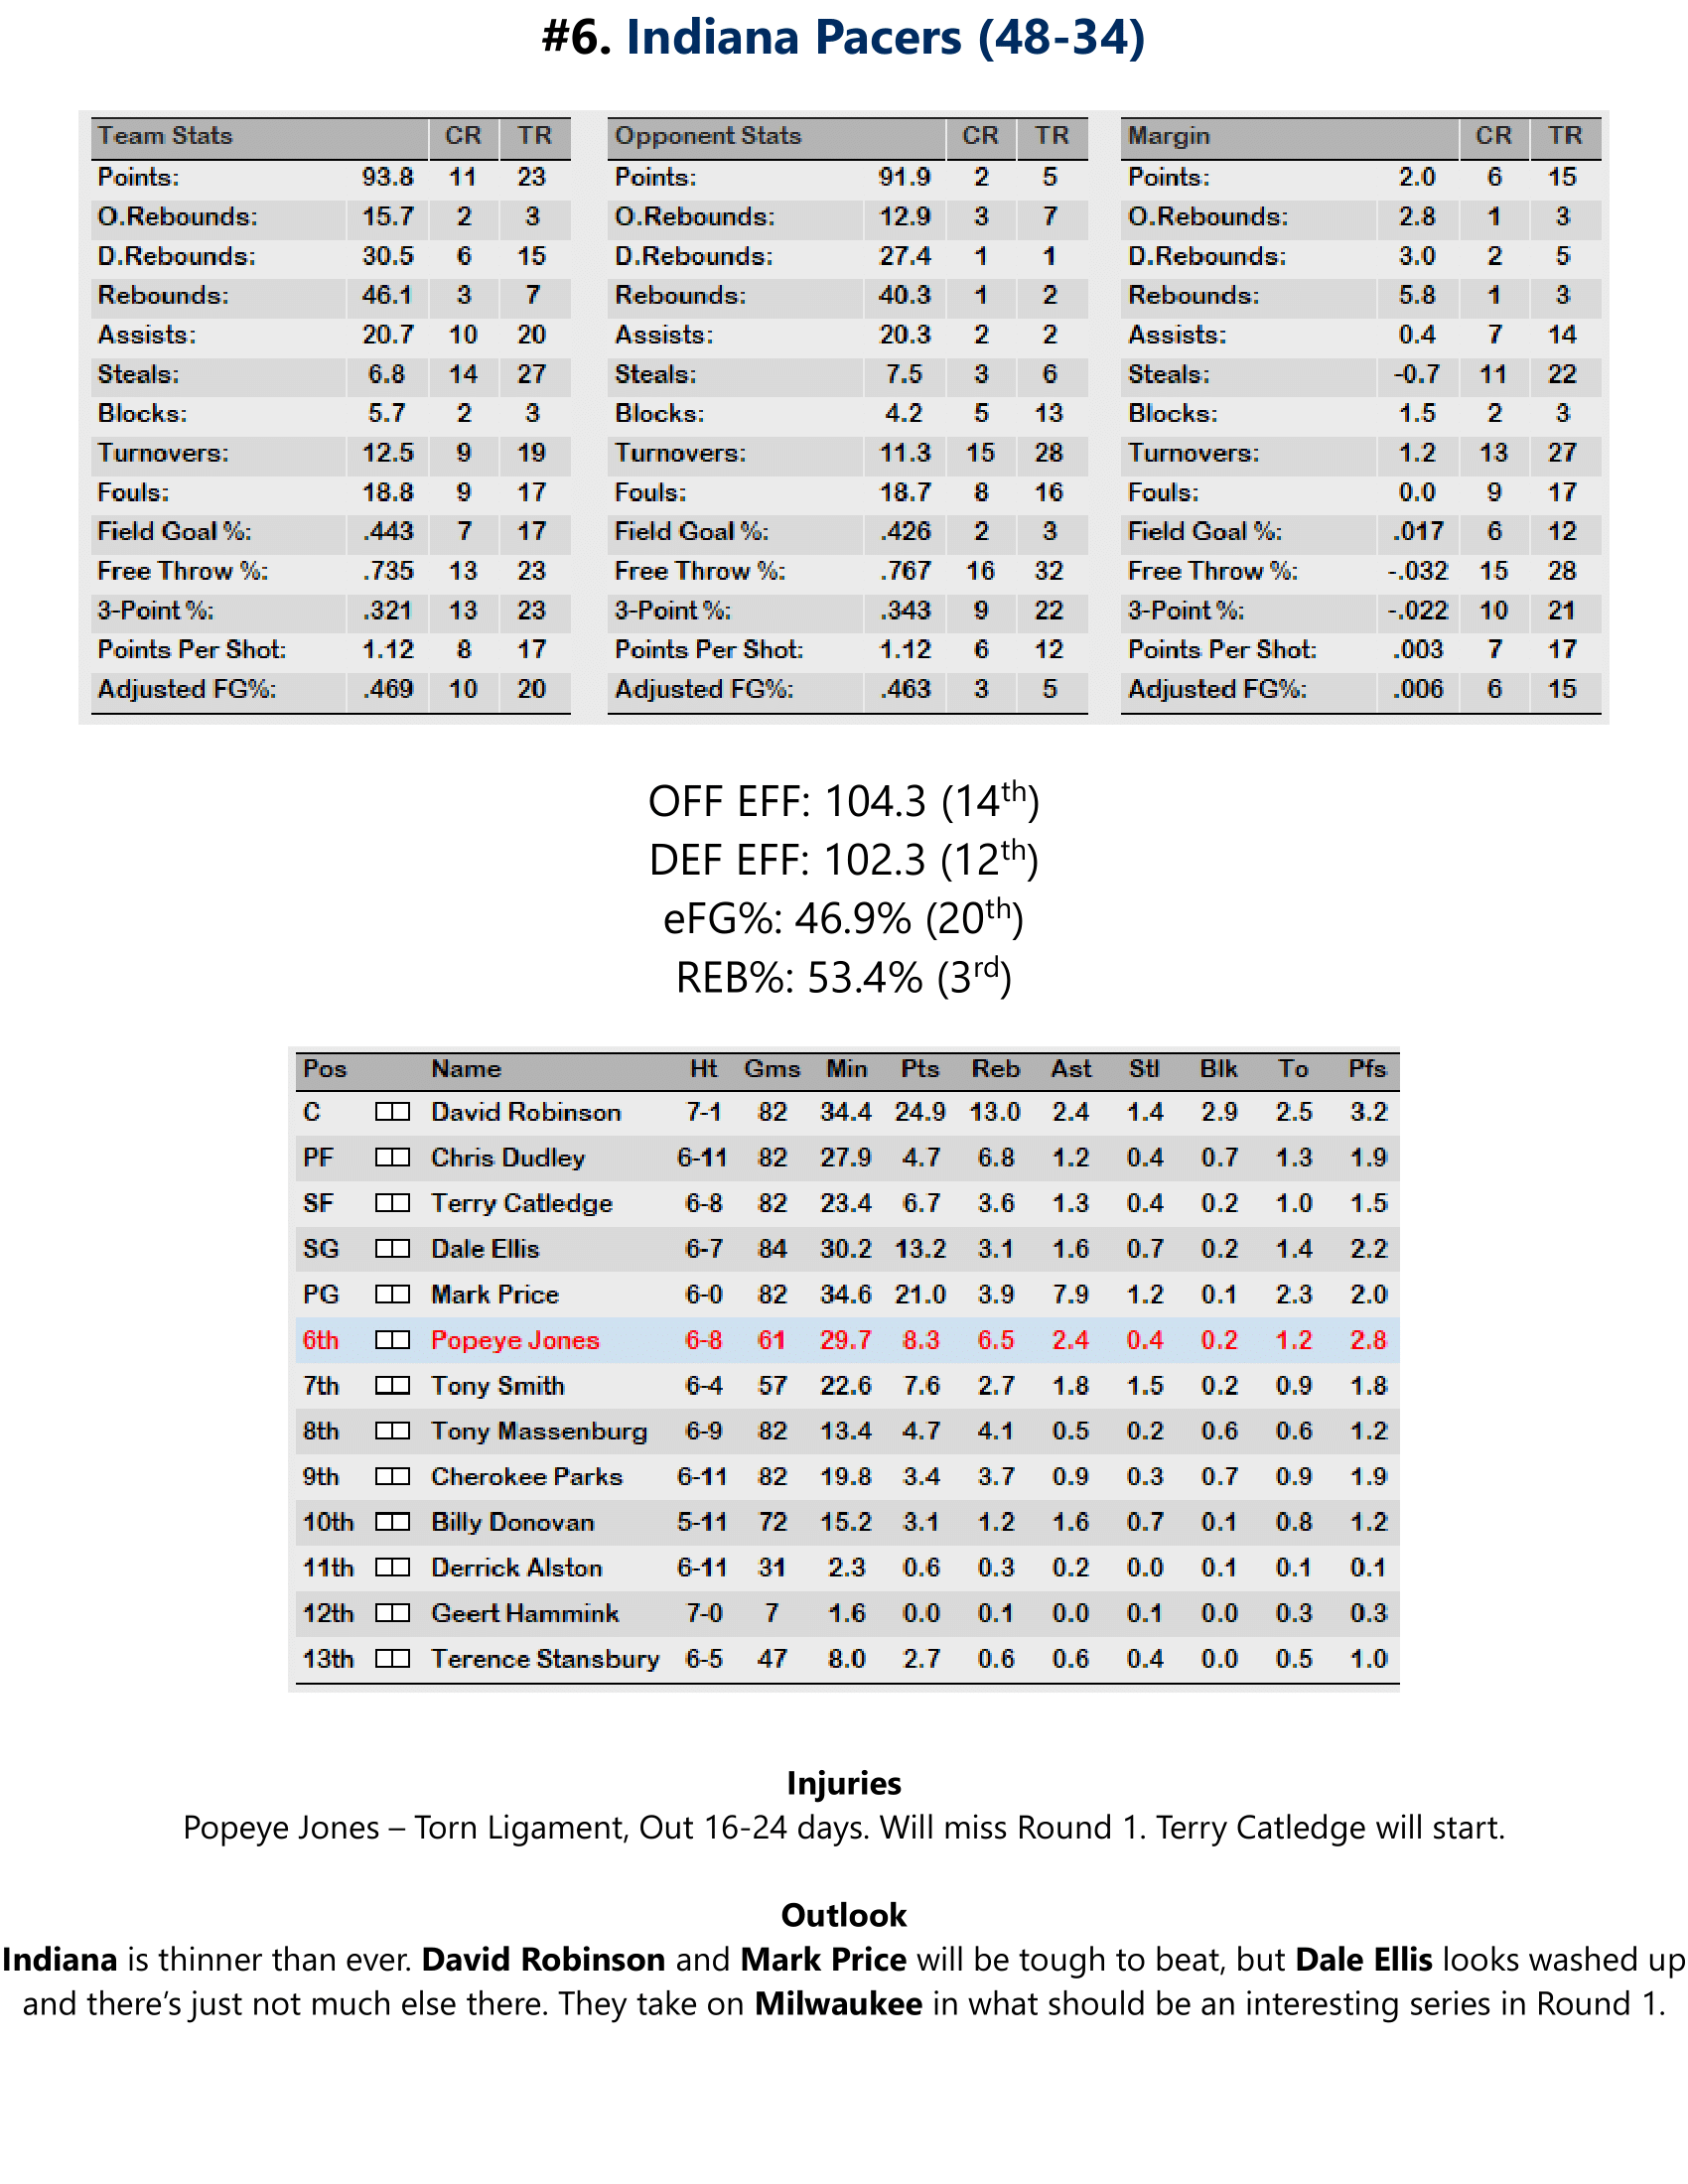 95-96-Part-3-Playoff-Preview-15.png